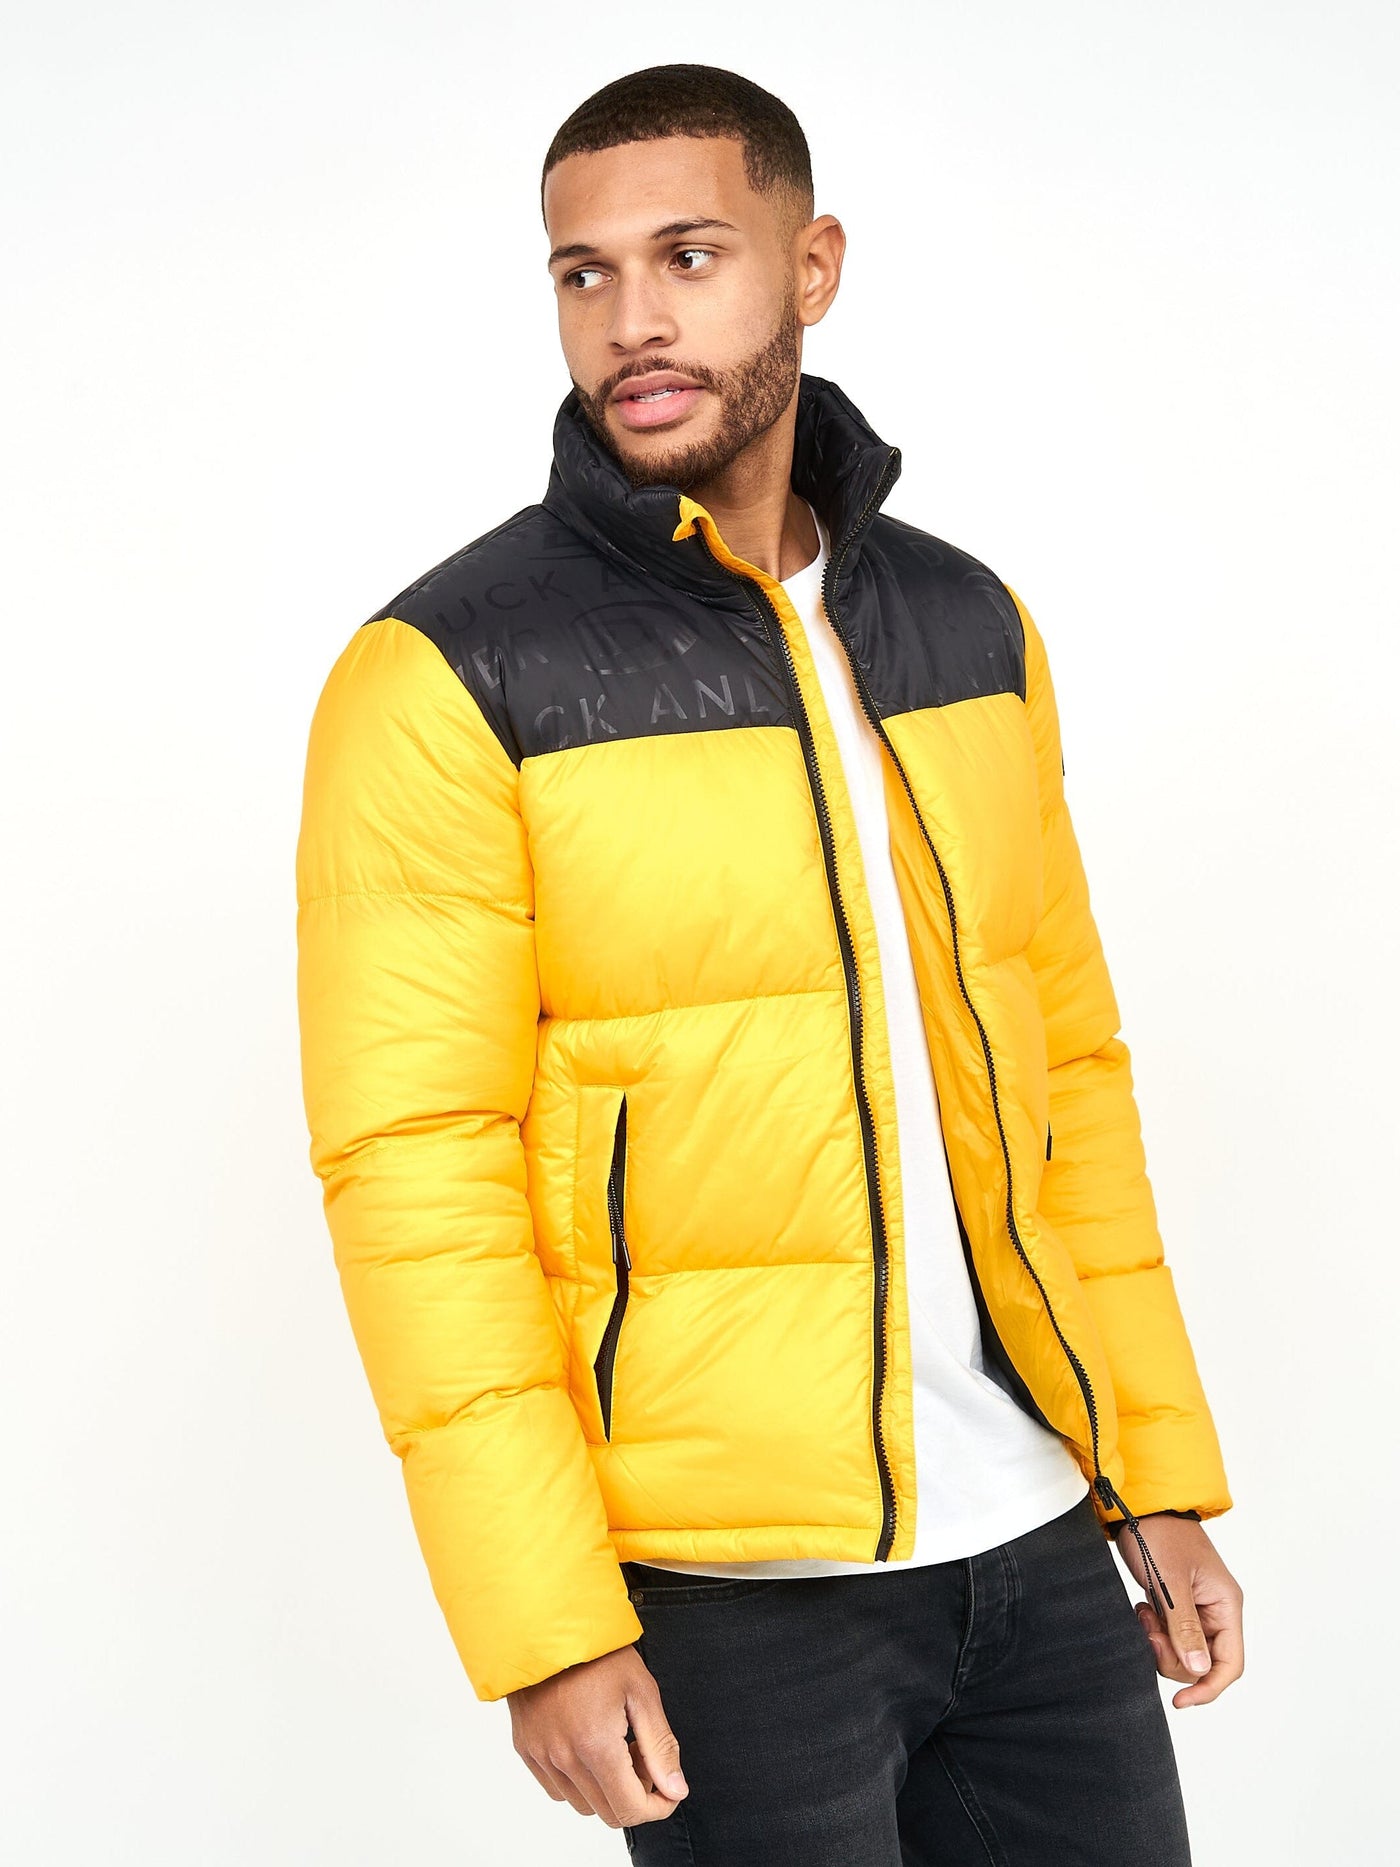 Synmax 2 Quilted Jacket Yellow